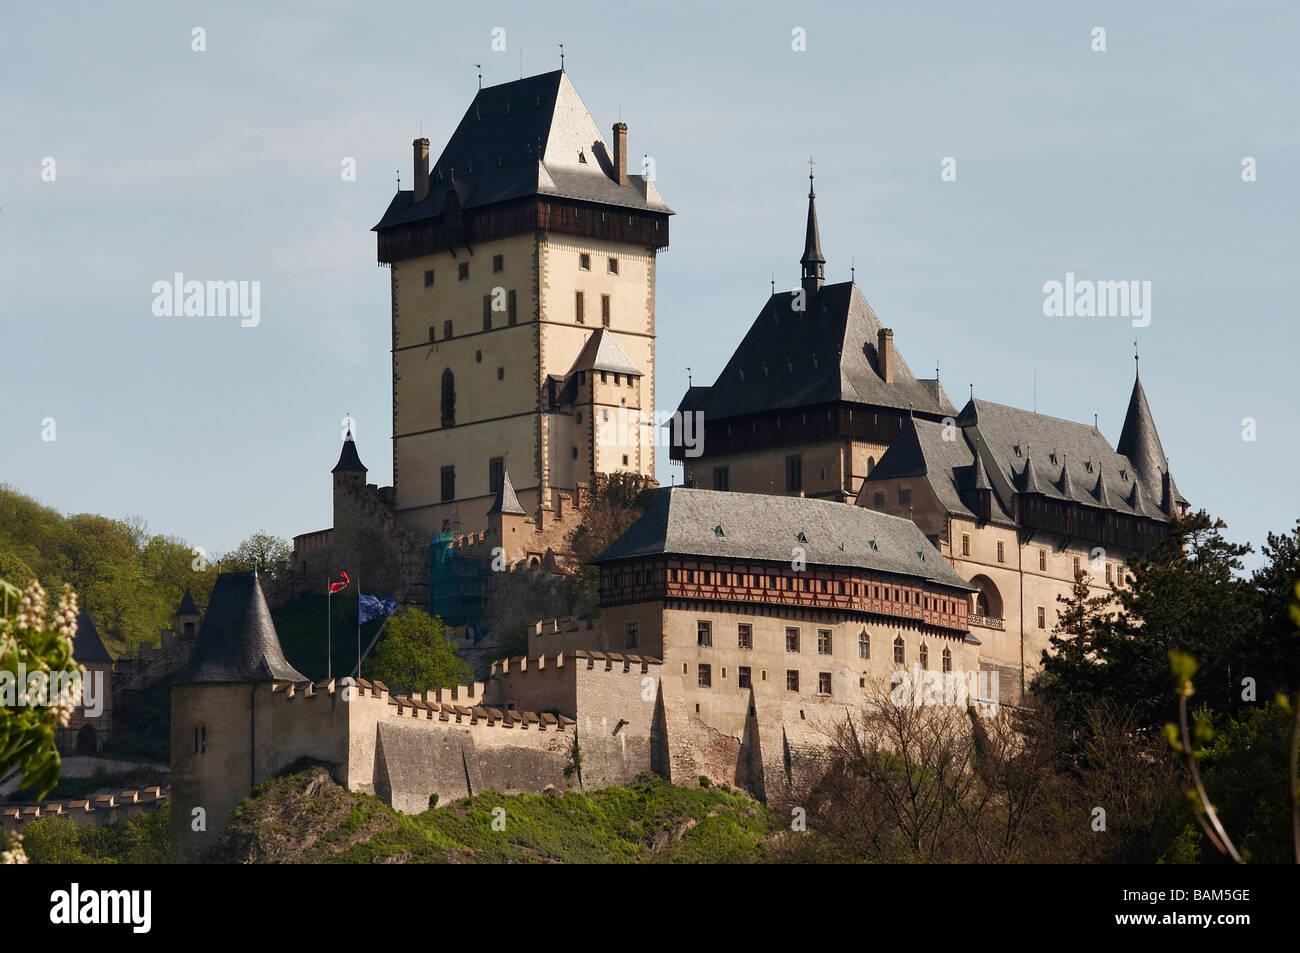 Carl´s stone - Karlstejn - Karlstein - large Gothic castle founded 1348  by Charles IV Stock Photo